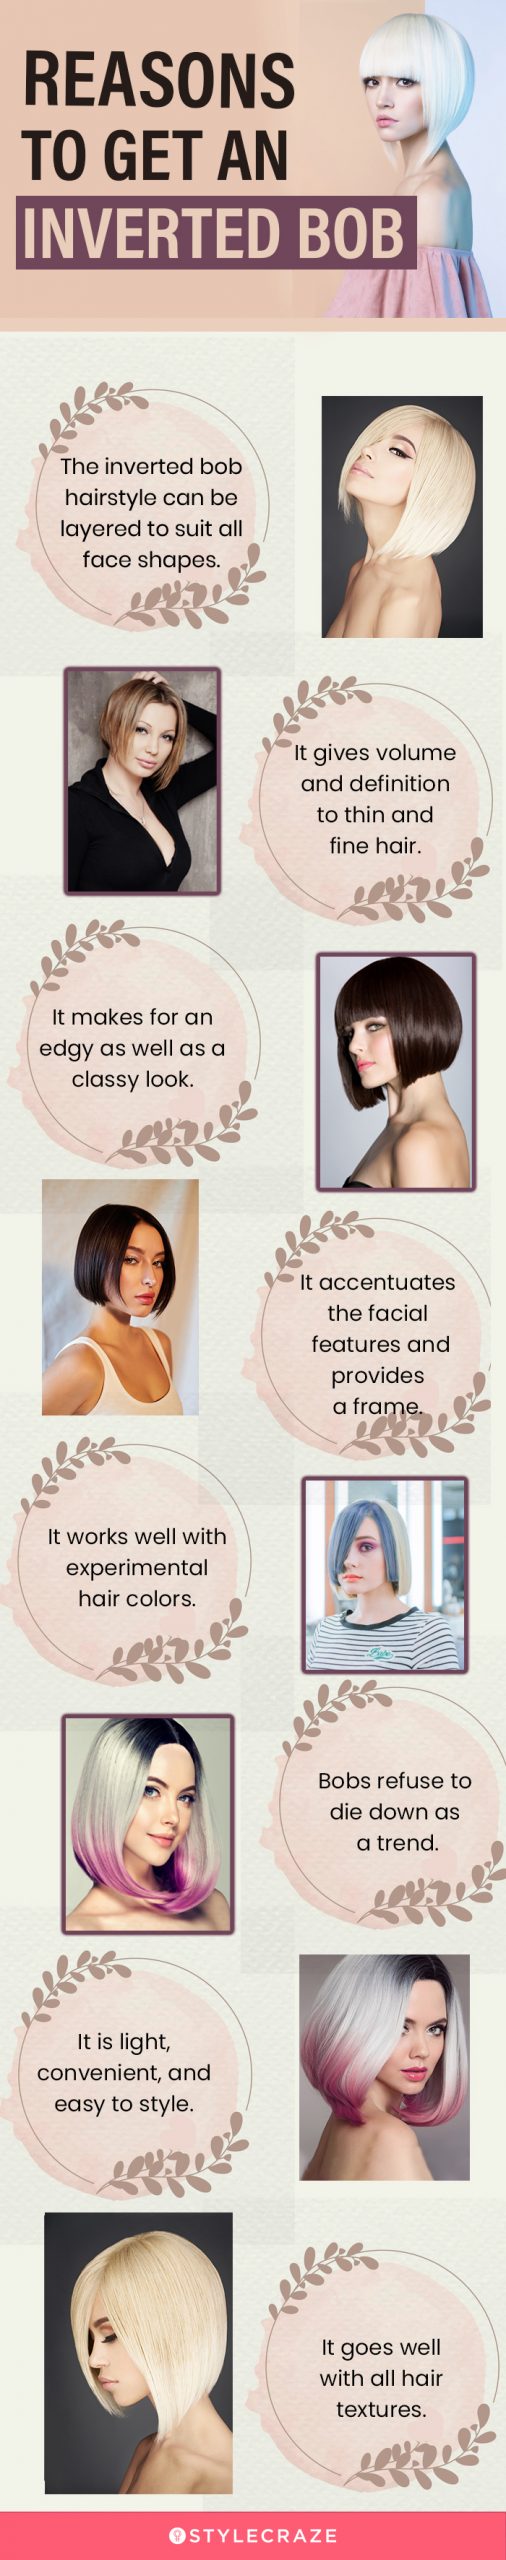 reasons to get an inverted bob (infographic)